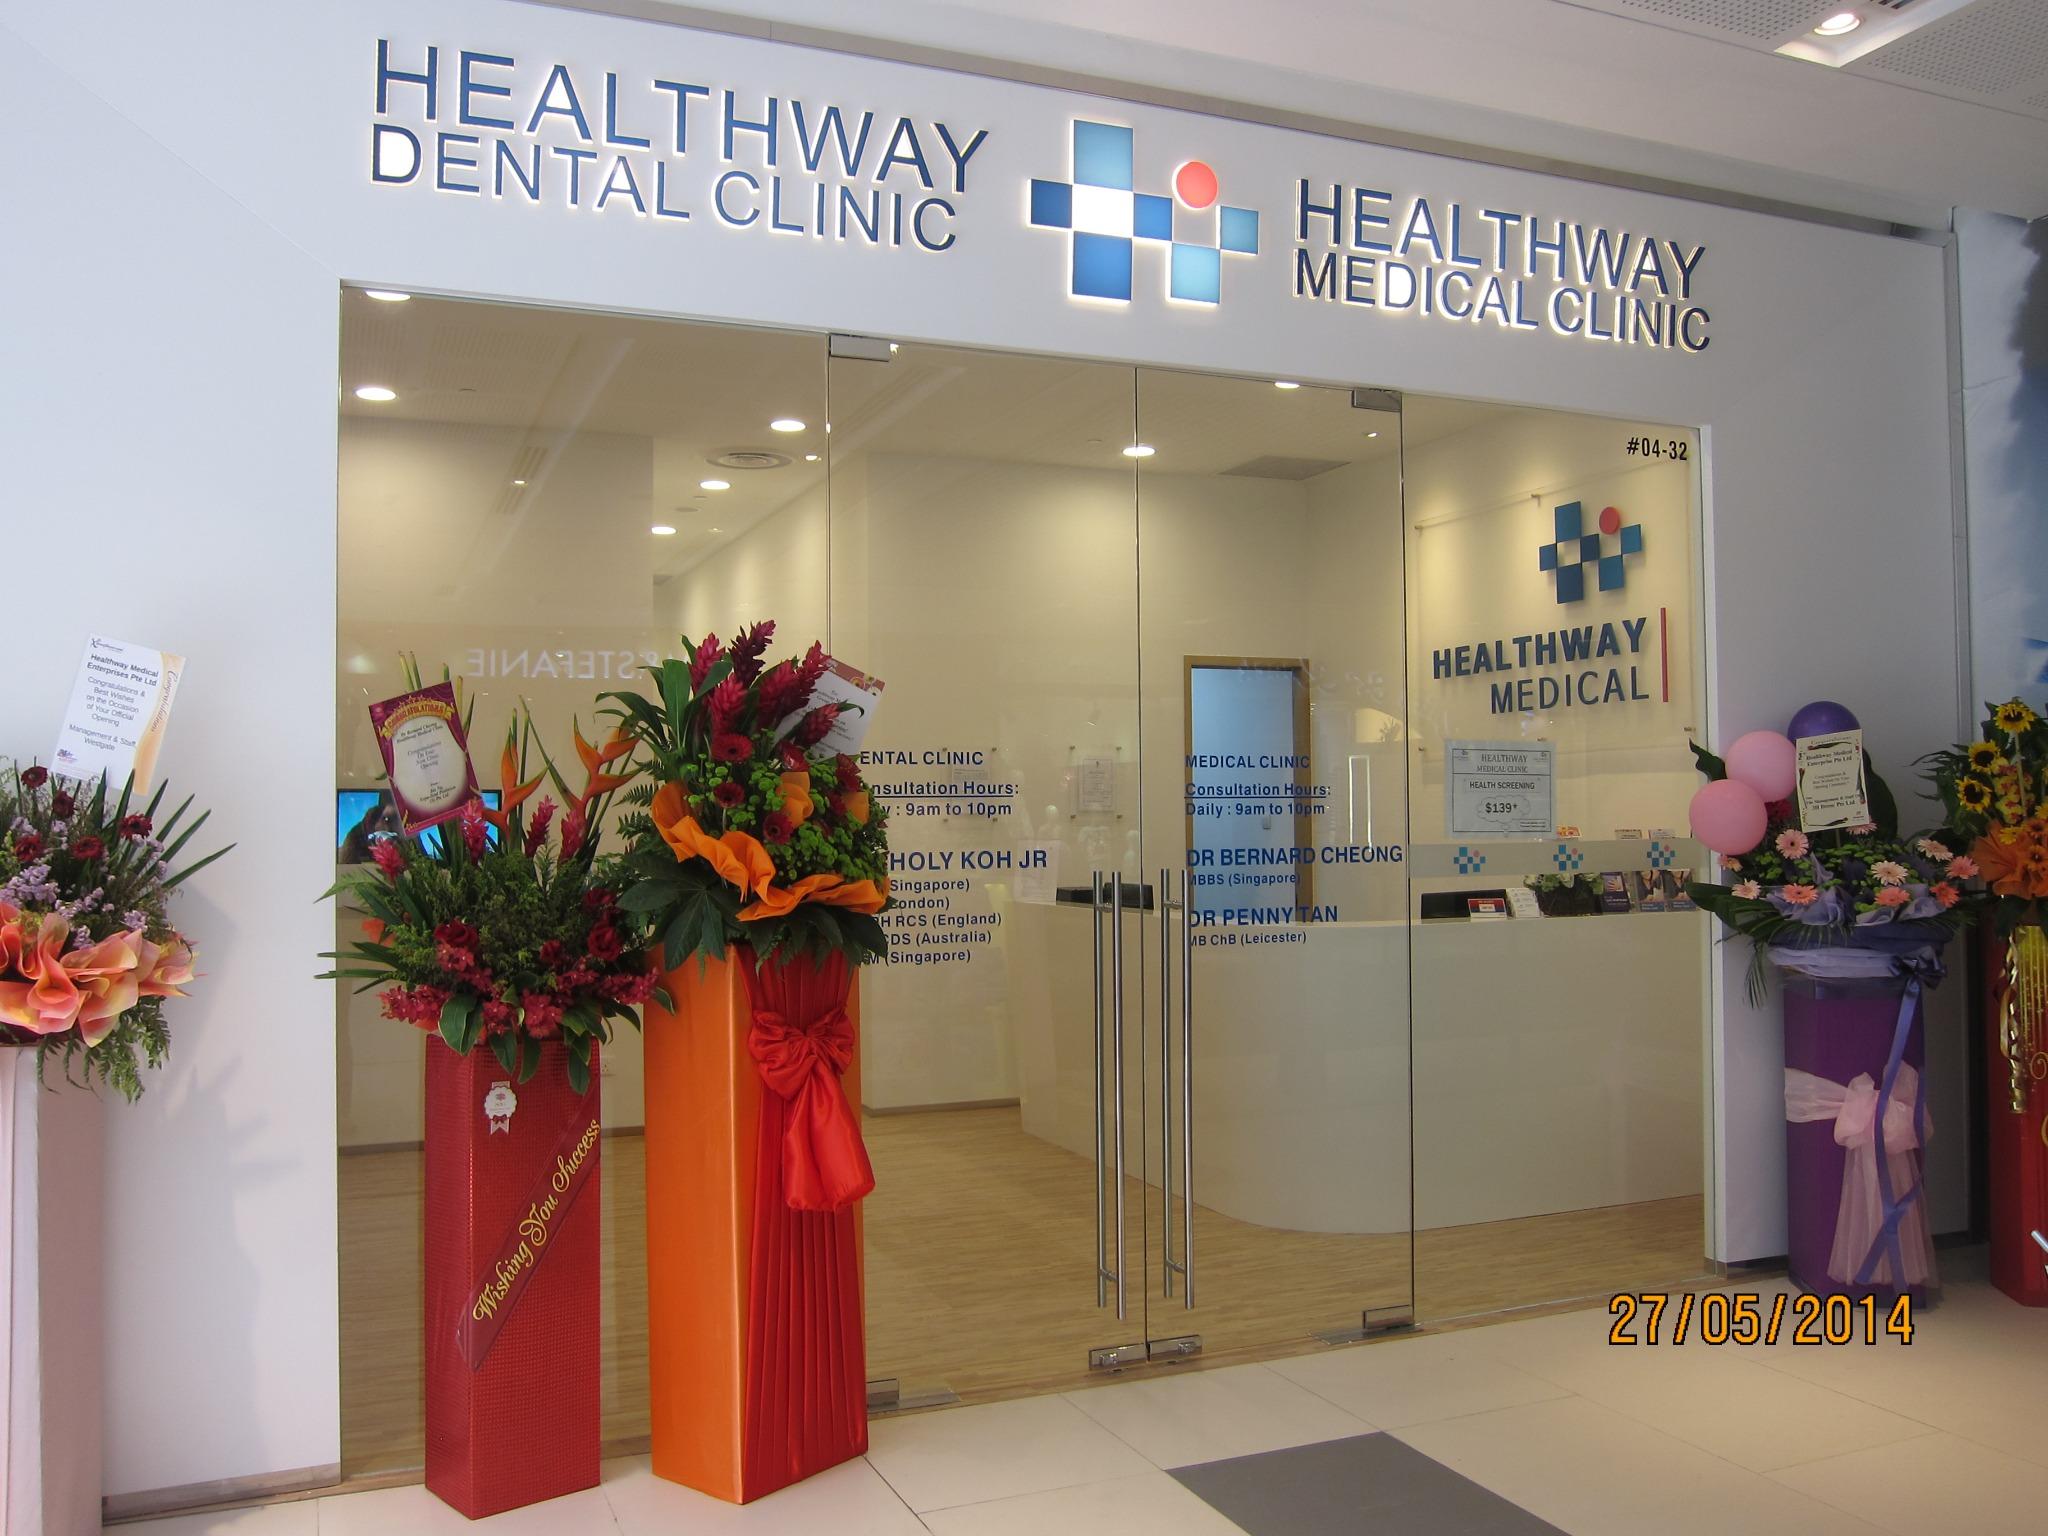 Healthway Dental Healthway Dental Clinic Is Opened In Westgate 3 Gateway Drive 04 32 S Call Or 6560 6127 For Appt Http T Co Sqxlhmaaf6 Twitter